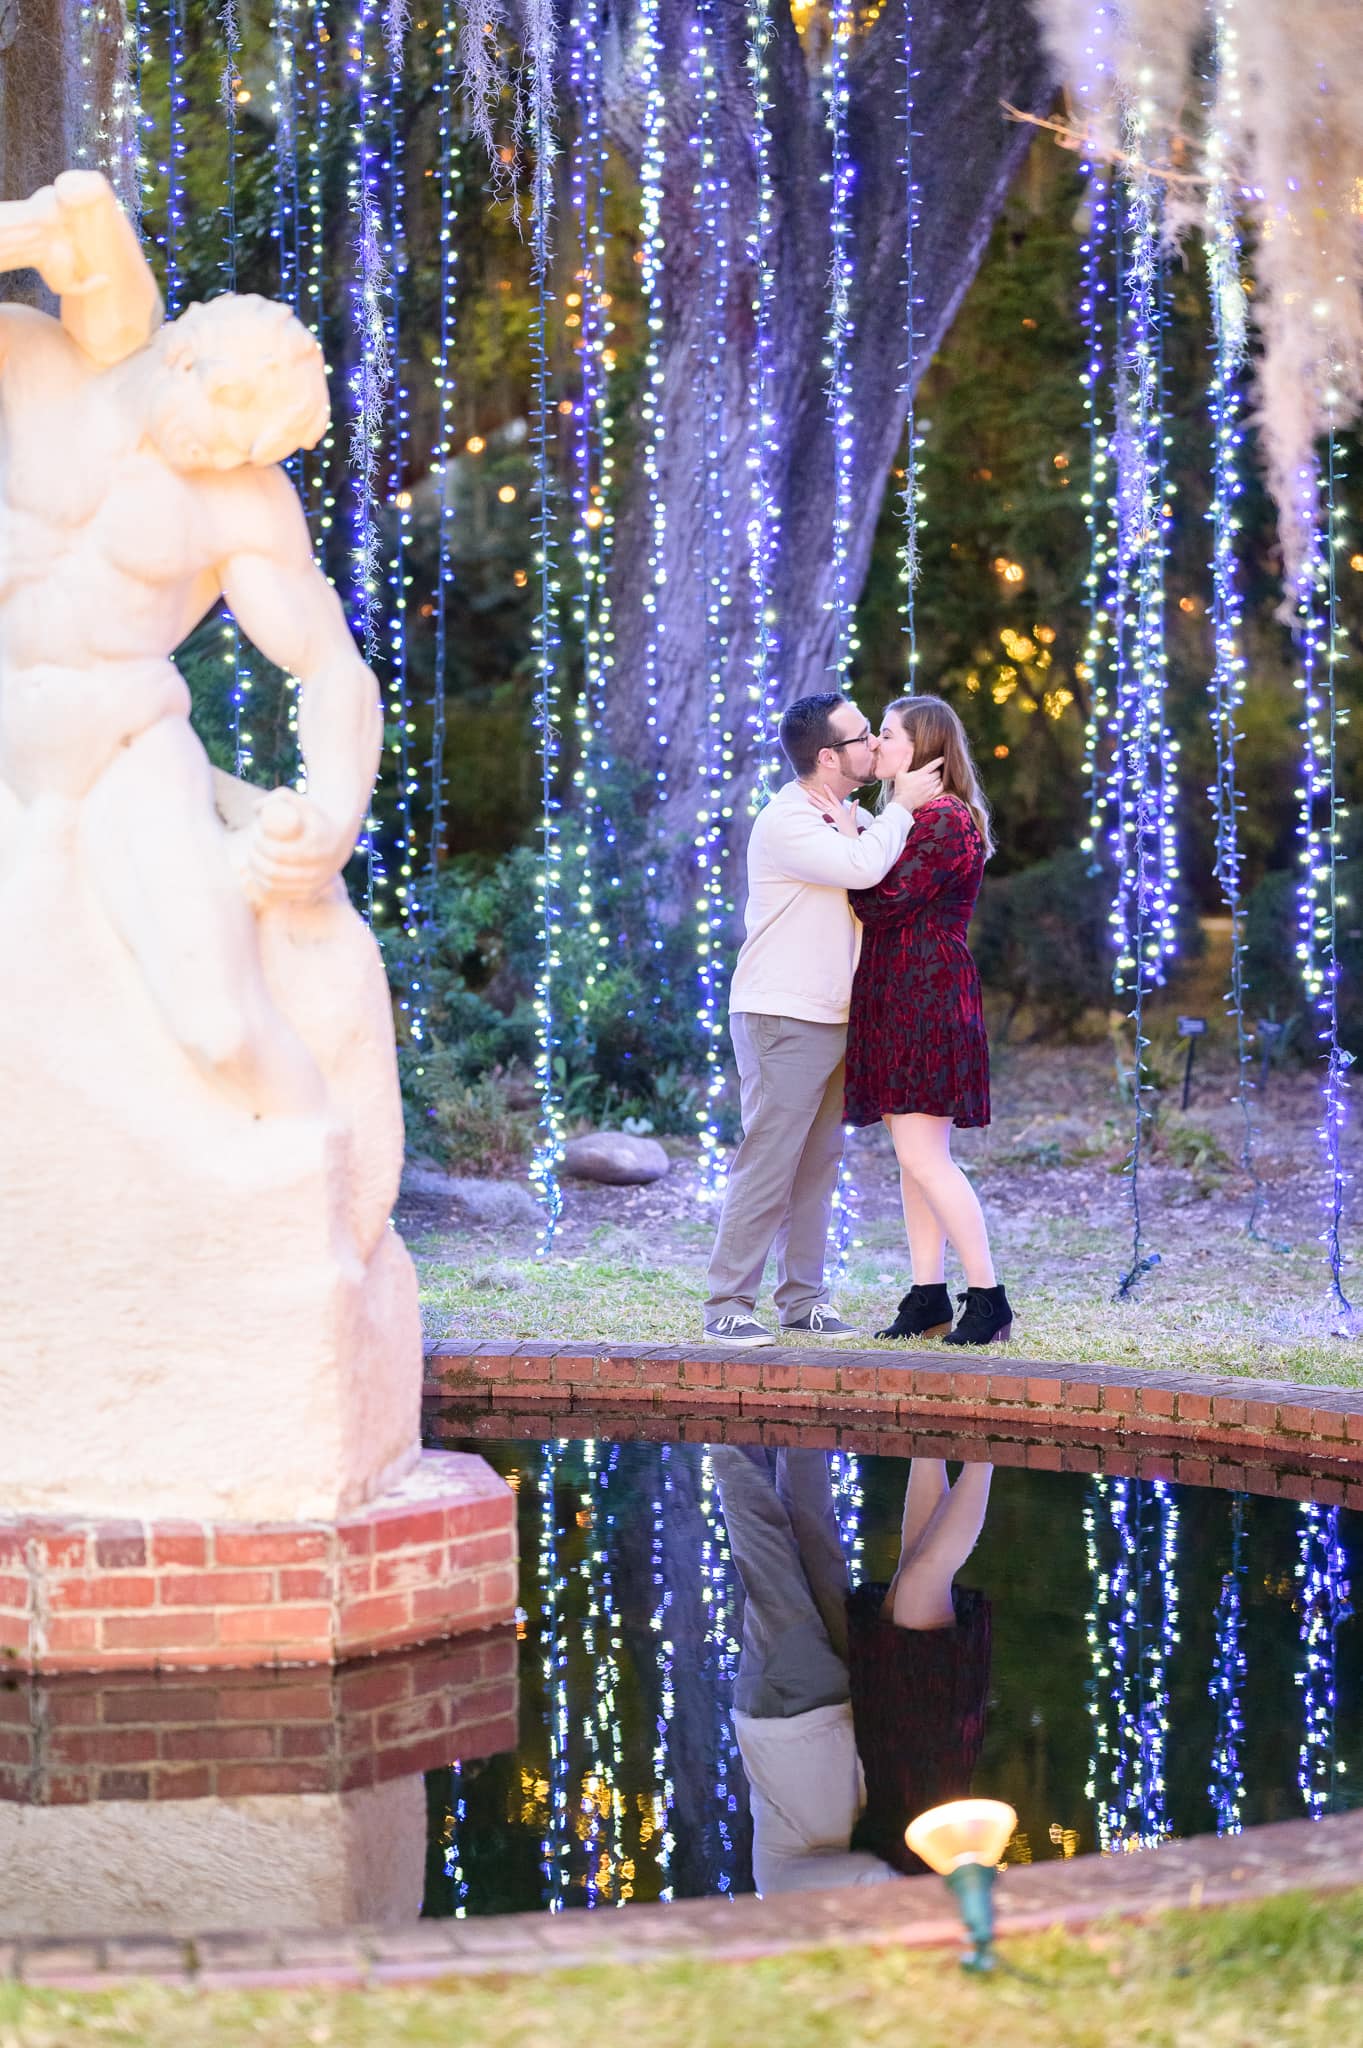 Colorful lights hanging from the trees - Brookgreen Gardens